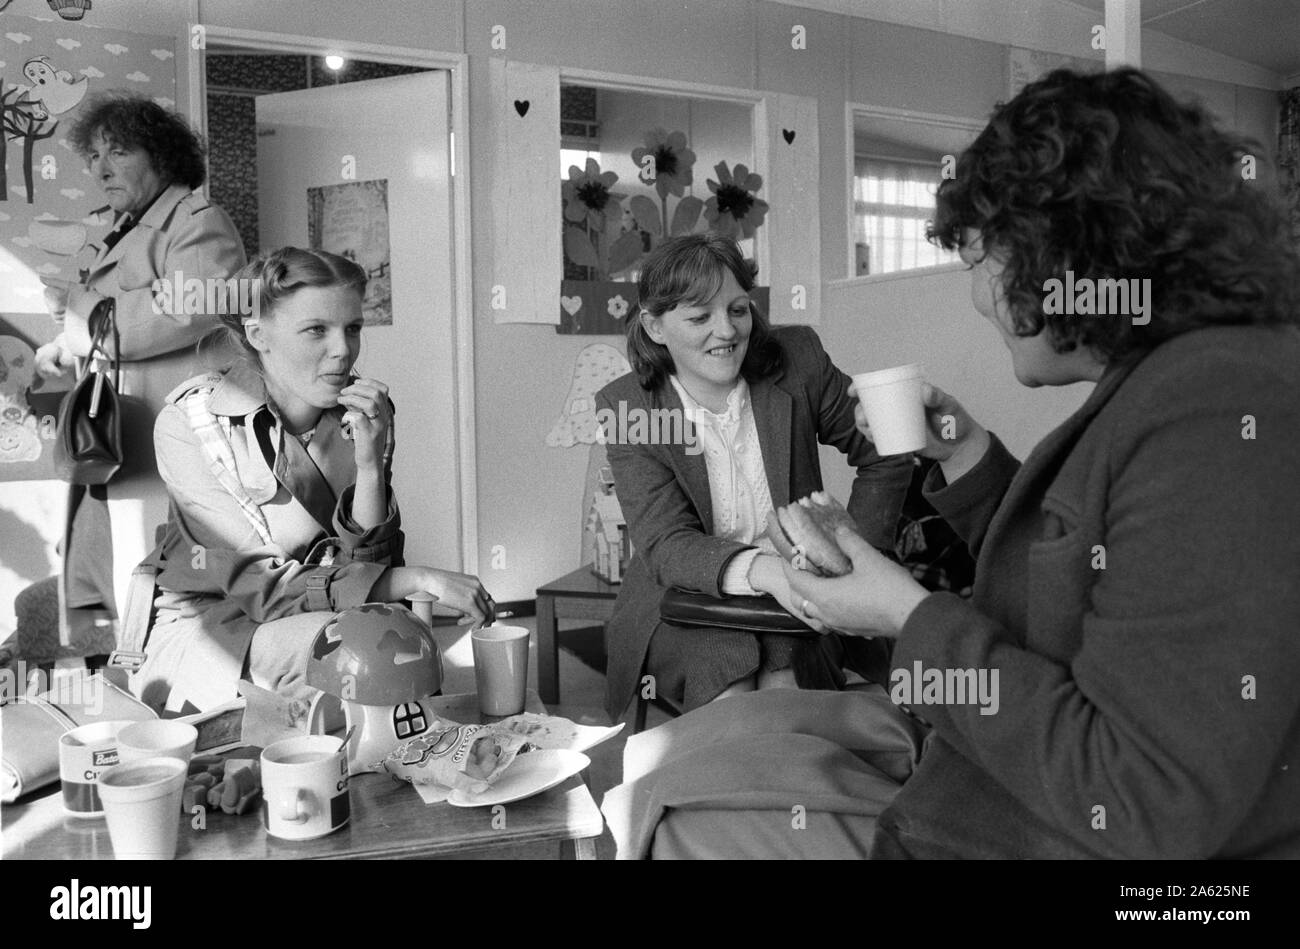 Catholic families from Derry Londonderry allowed a weekly visit to relatives imprisoned in the Crumlin Road prison jail Belfast 1983.The Troubles 1980s. Tea and playgroup for children after visiting men in jail. HOMER SYKES. Stock Photo